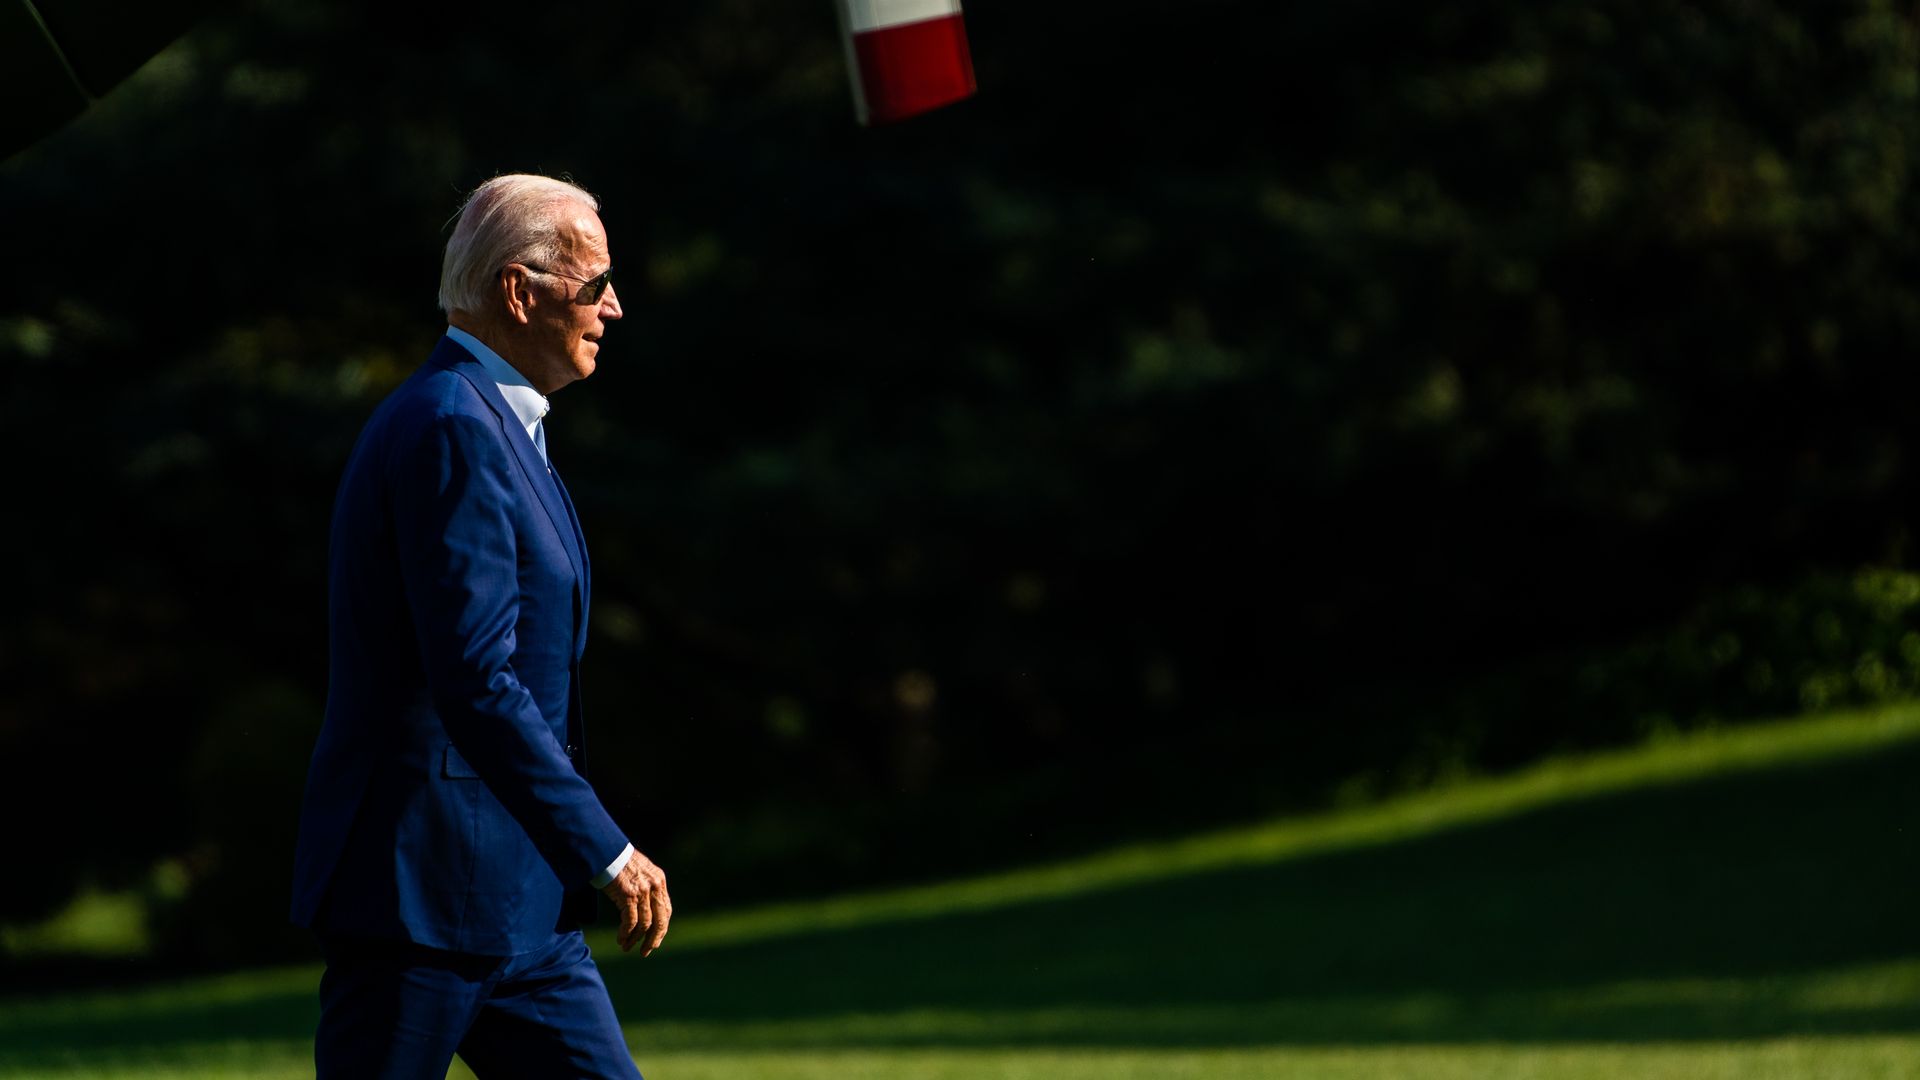 President Joe Biden walk to the Oval Office of the White House on July 20, 2022.